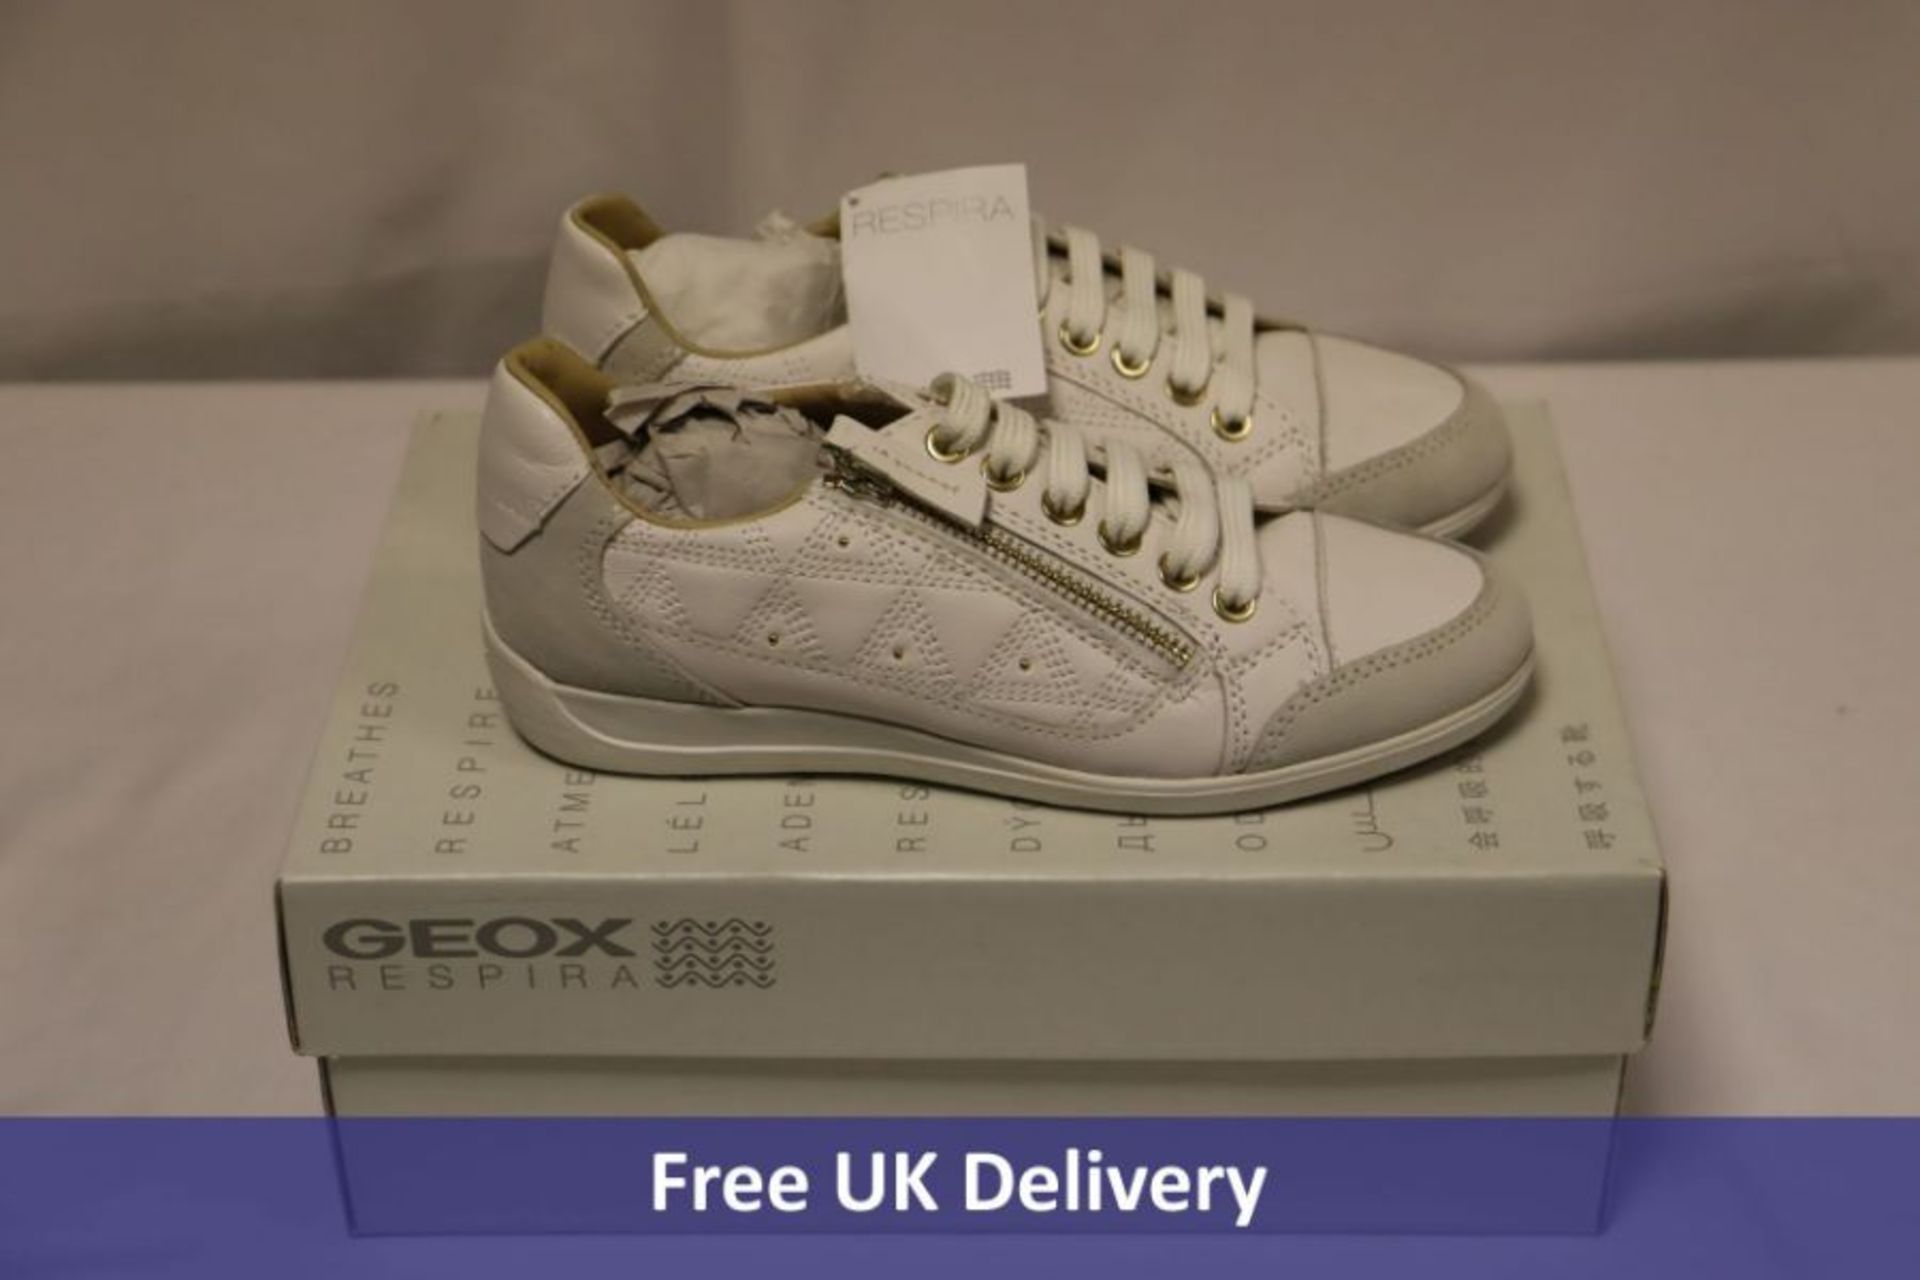 Geox D Myria C Nappa and Suede Women's Trainers, White/Off White, UK 2.5